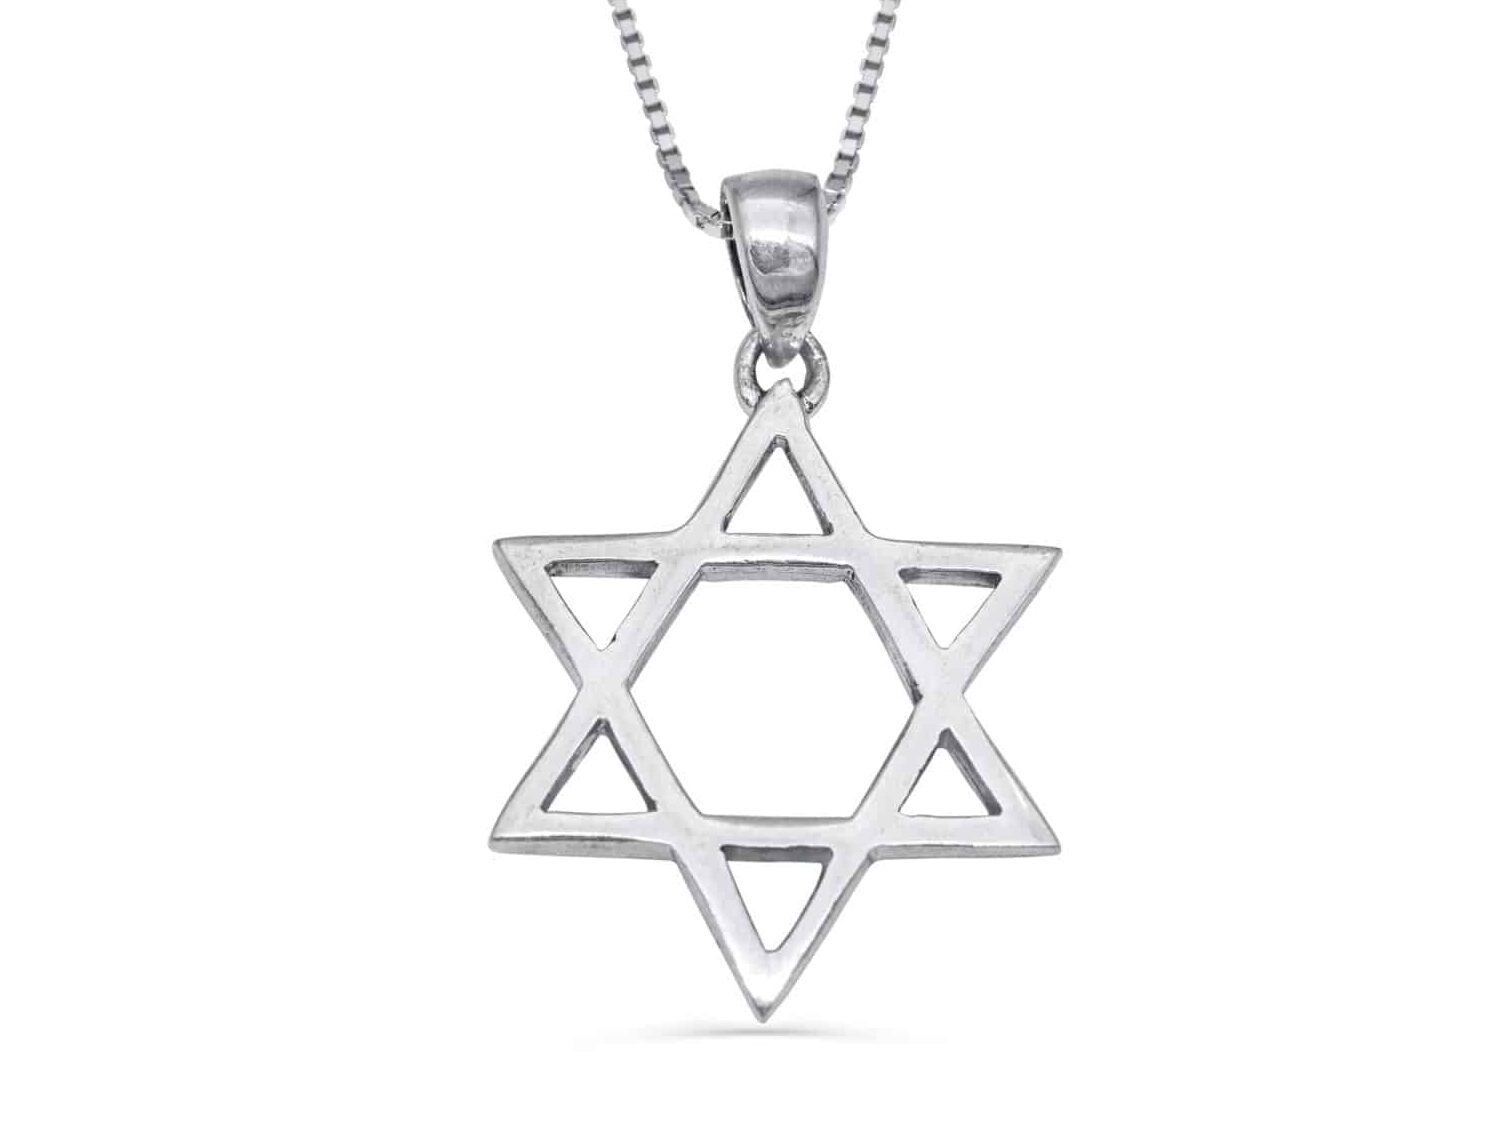 Big and Classic Silver Star of David Necklace